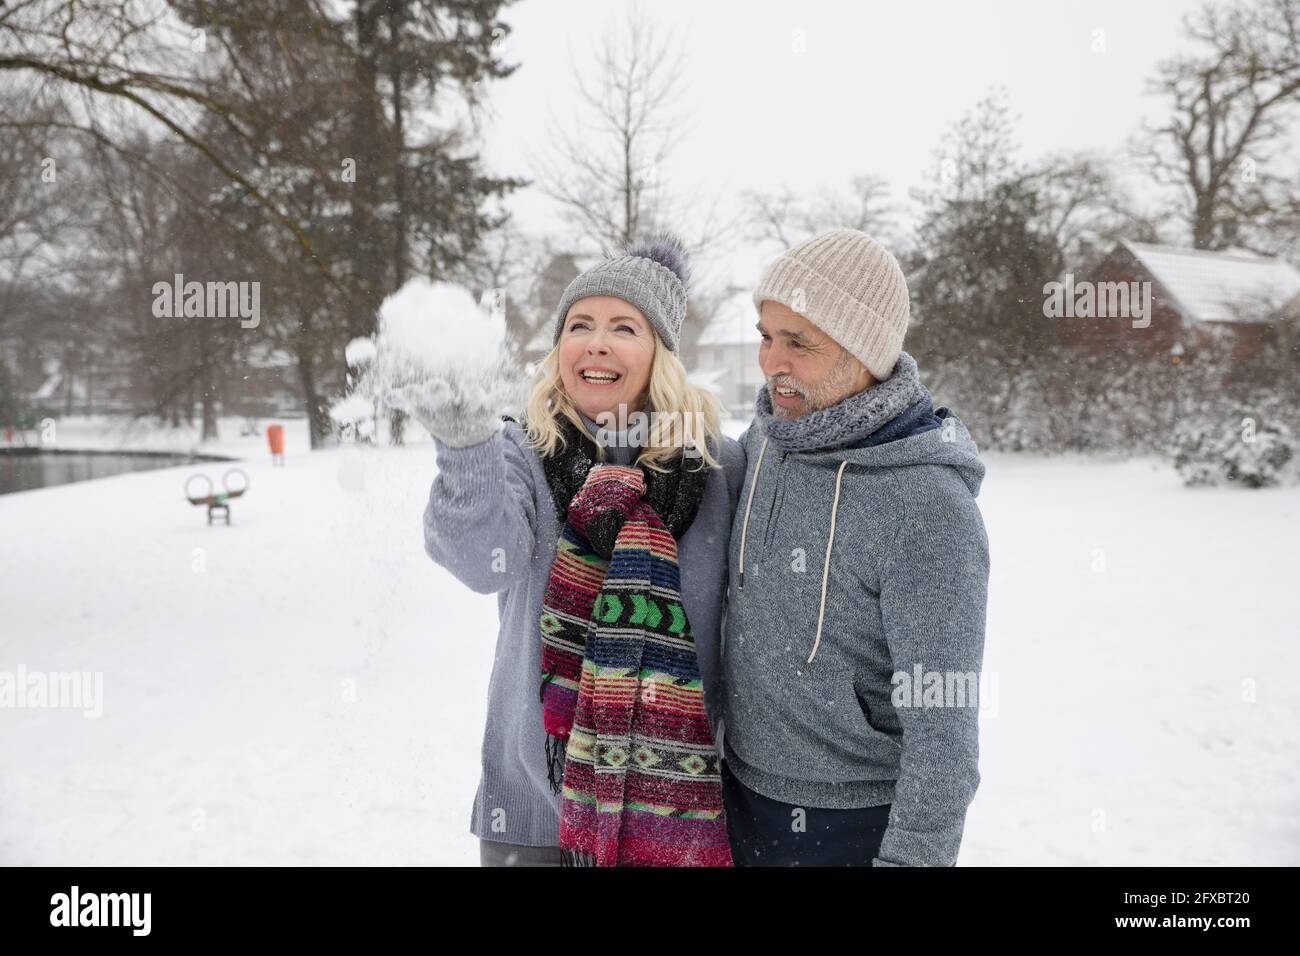 Cheerful woman throwing snow while standing with man at park Stock Photo